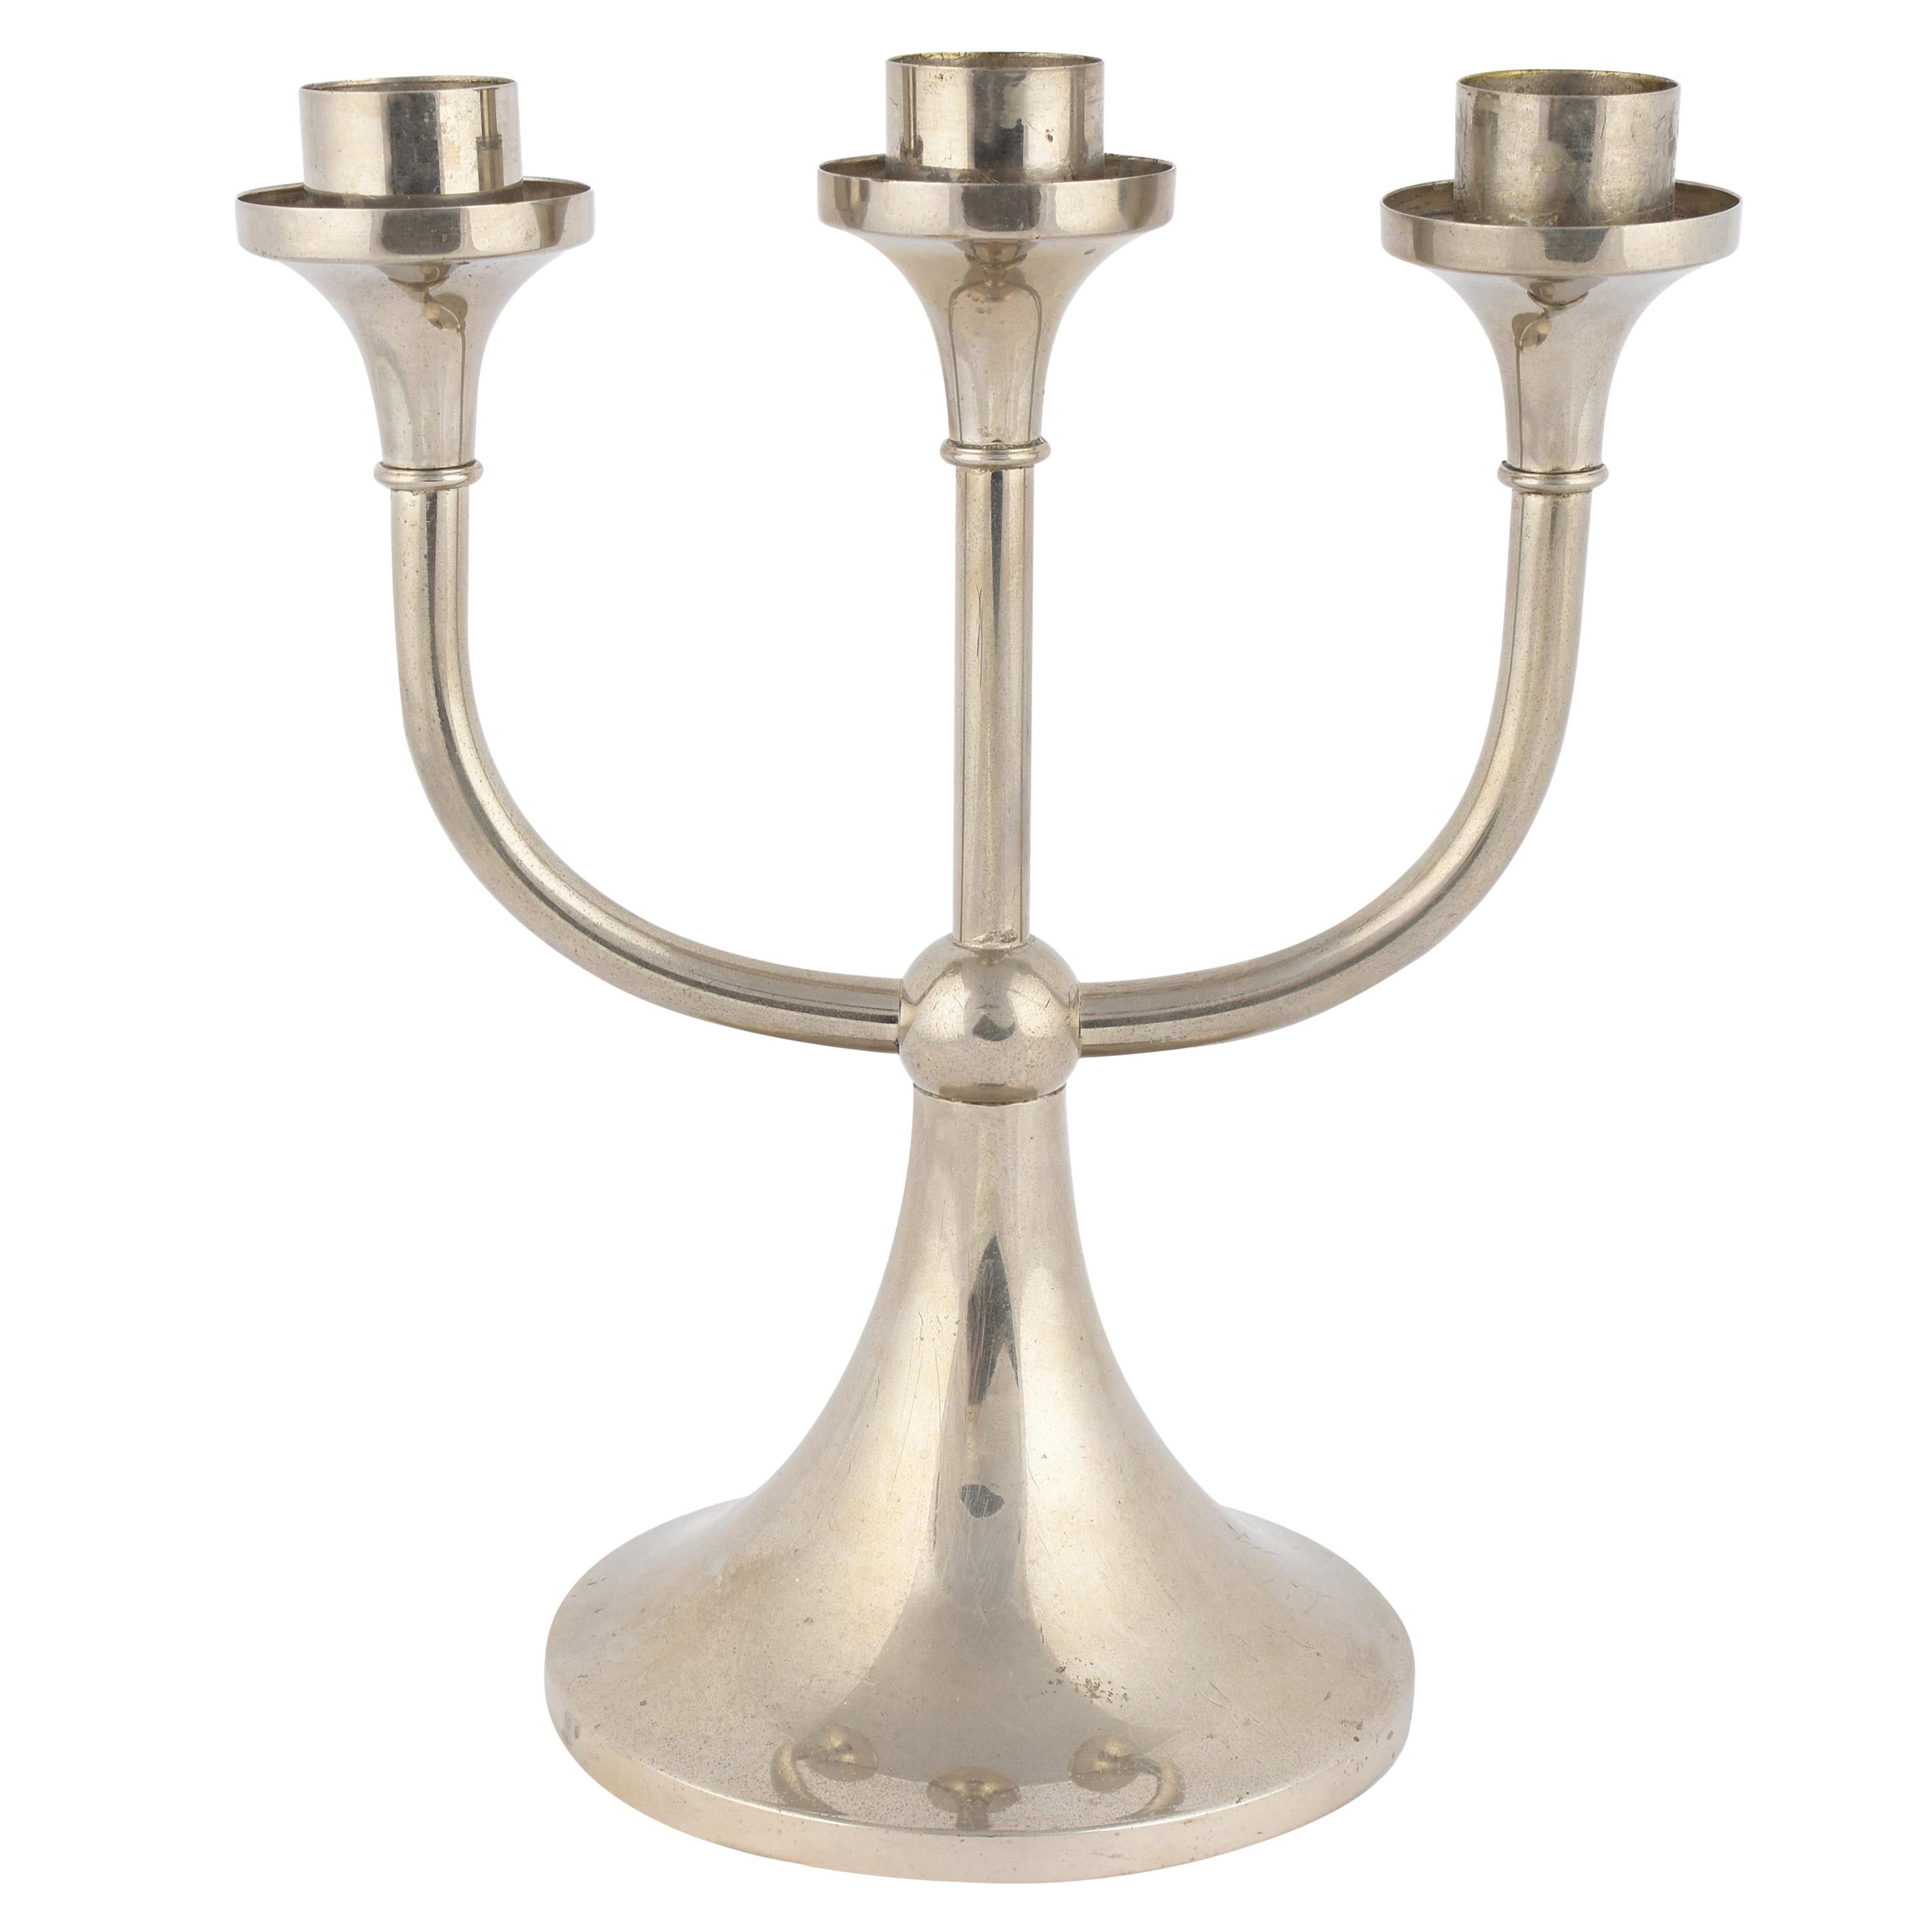 Nickel-Plated Metal Candle Holder by Kallmeyer & Harjes, Gotha, Germany, 1930s For Sale